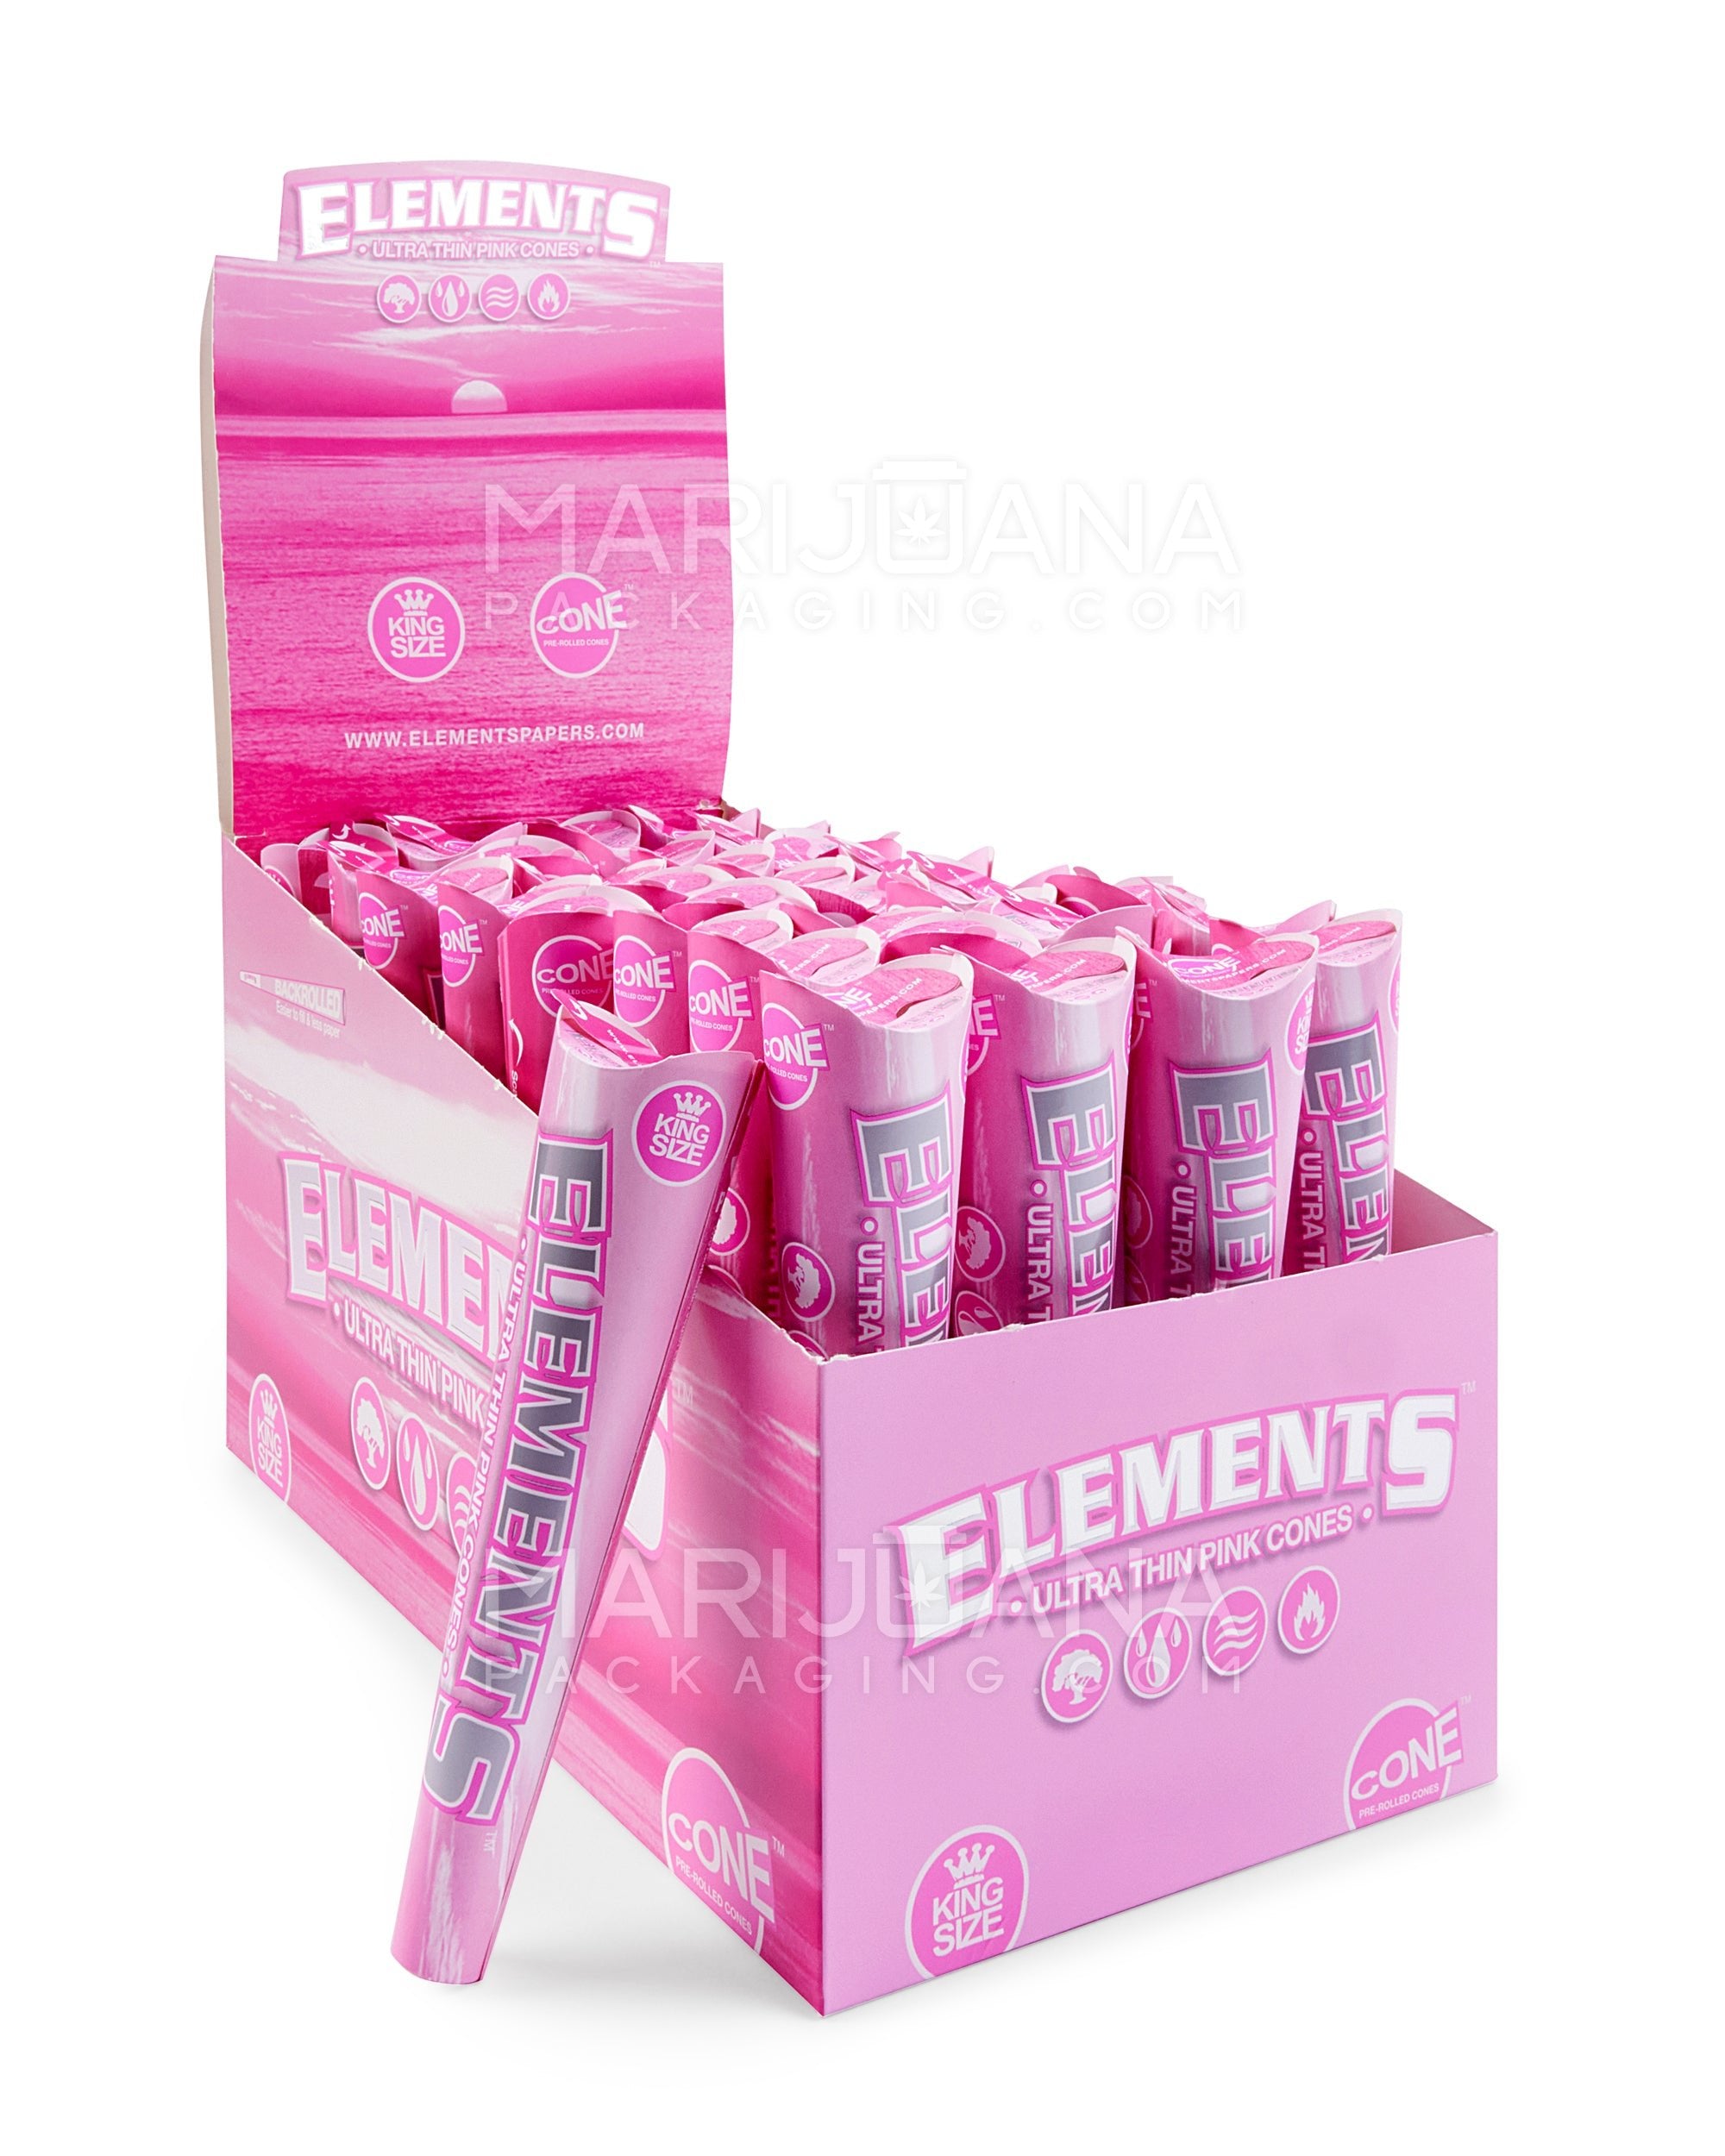 ELEMENTS | 'Retail Display' King Size Ultra Thin Pre-Rolled Cones | 109mm - Pink Rice Paper - 32 Count - 1